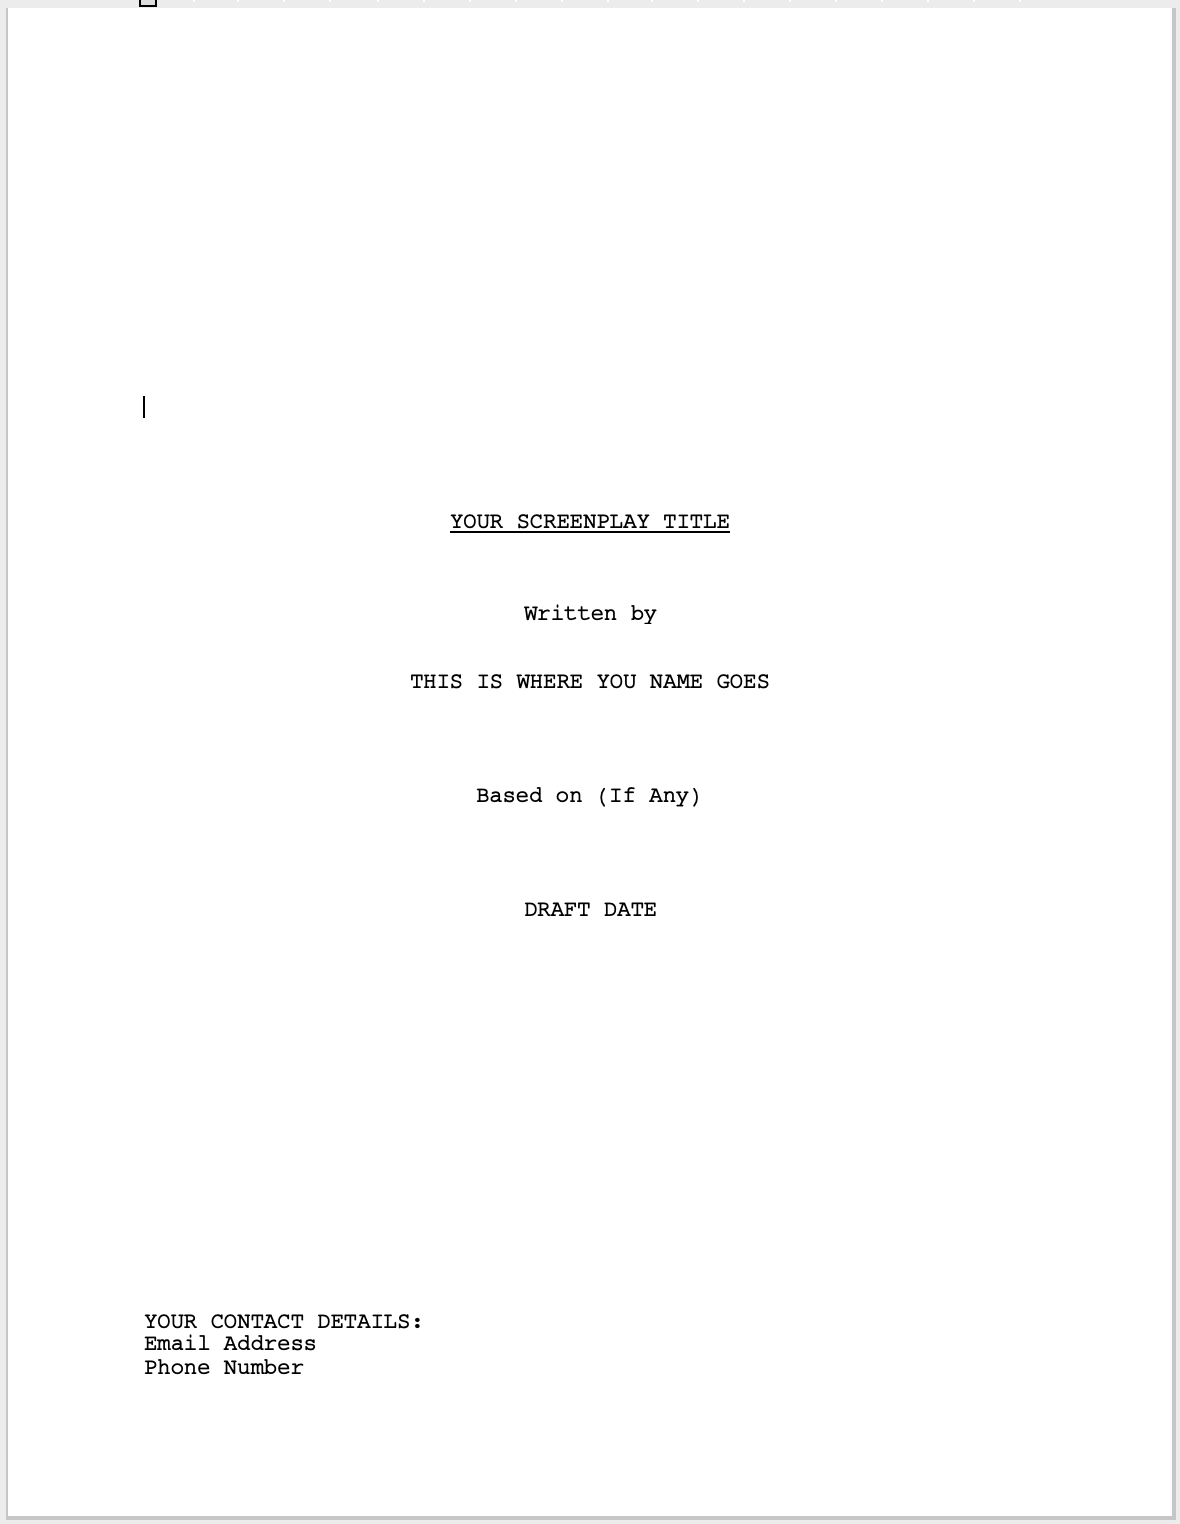 How to Format Your Screenplay for Filmmakers (Movie Script Template)